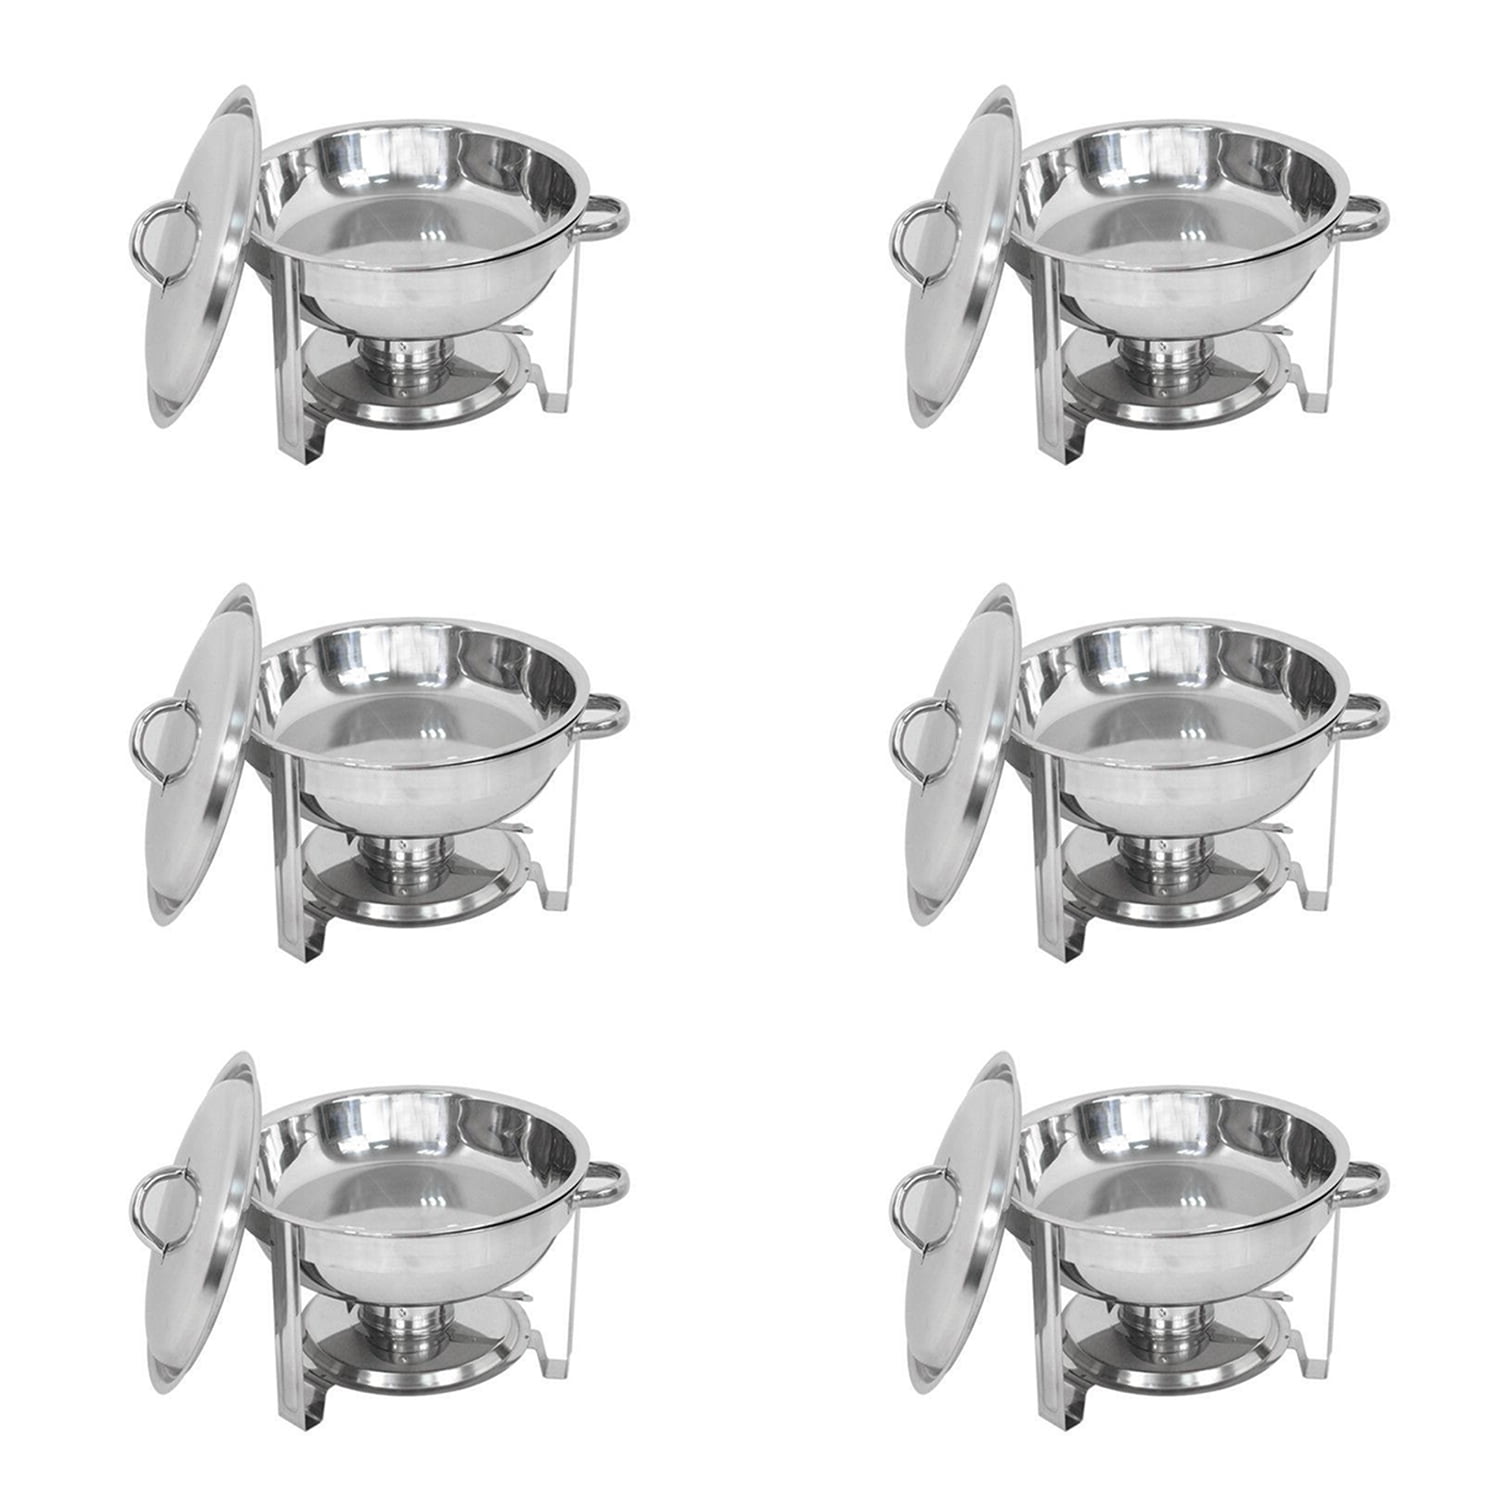 6 Pack Round Chafing Dish Stainless Steel Full Size Tray Buffet Catering 5 Quart